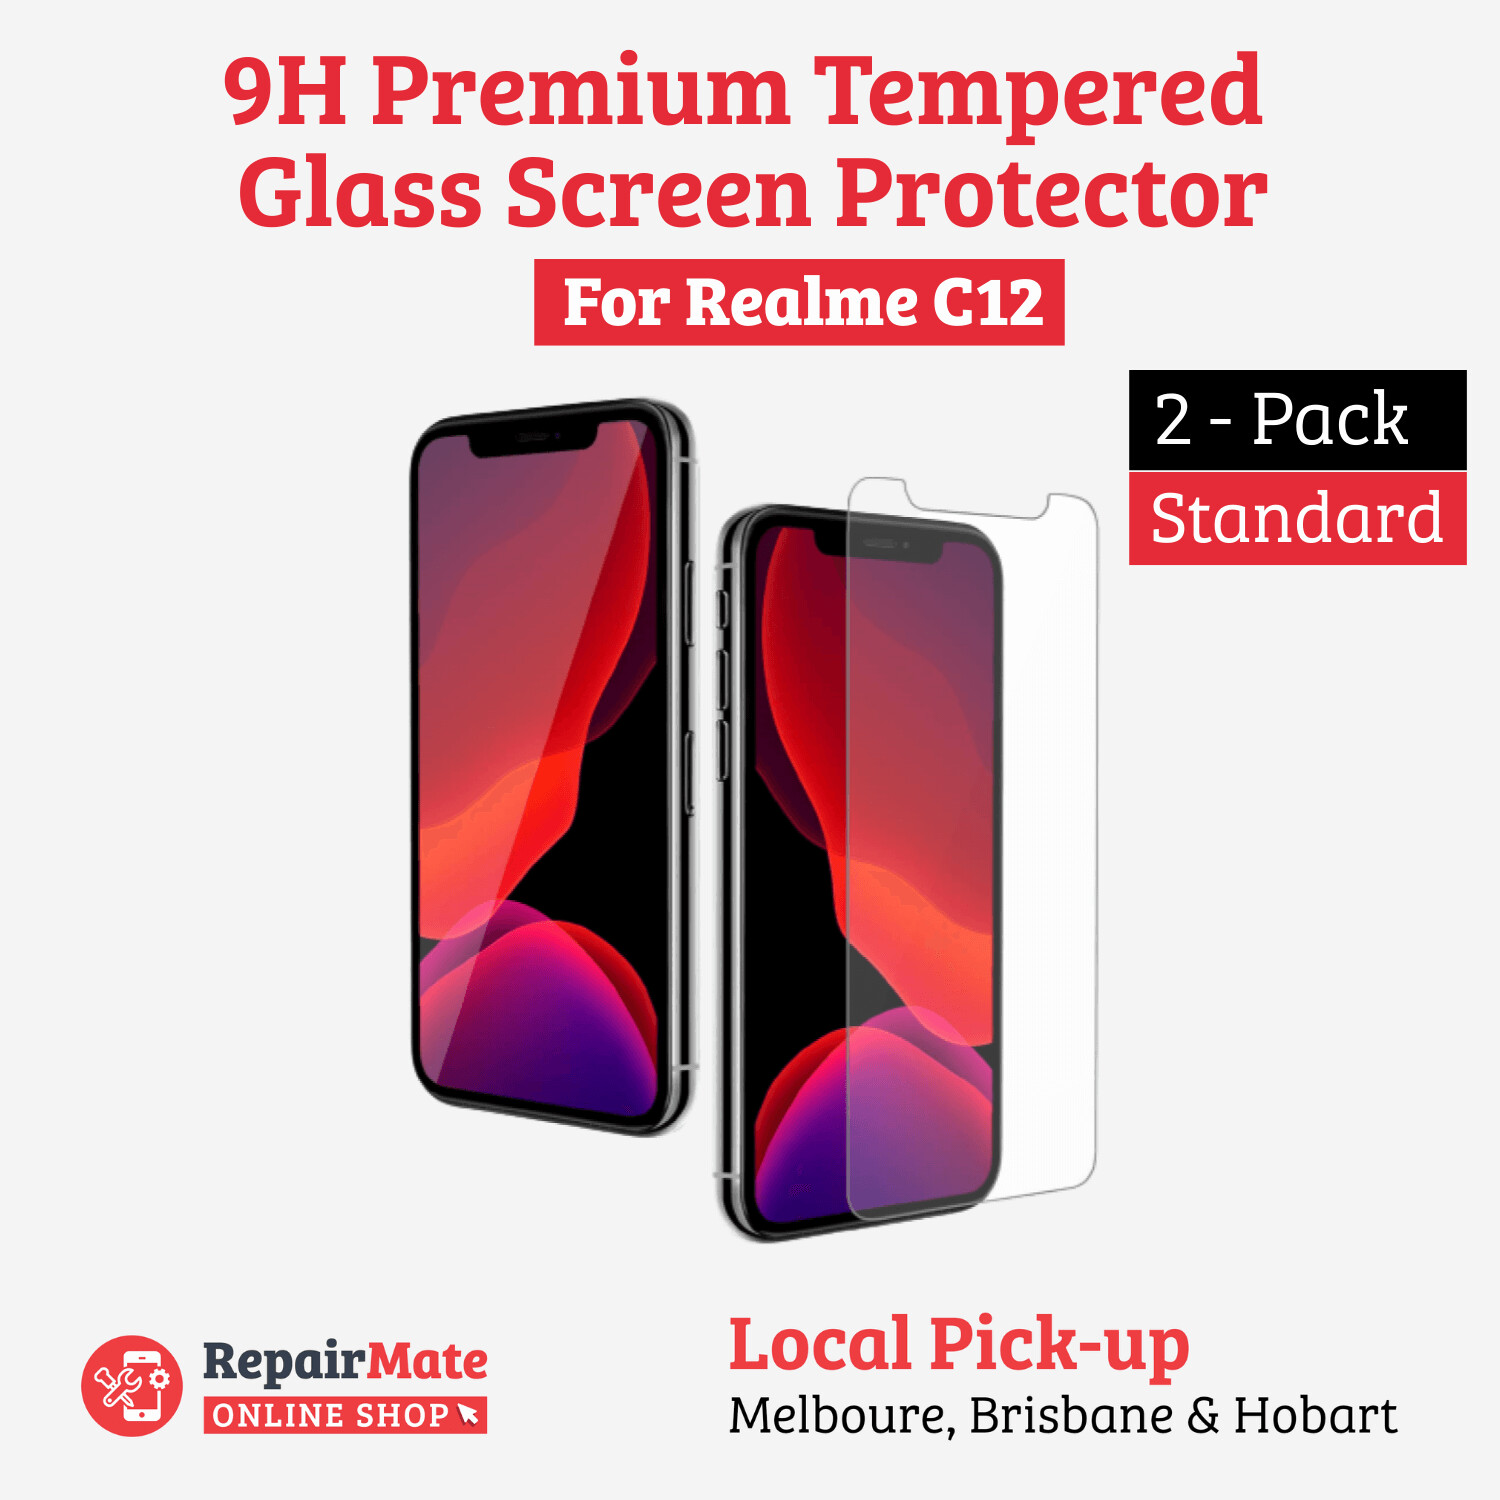 Realme C12 9H Premium Tempered Glass Screen Protector [2 Pack]